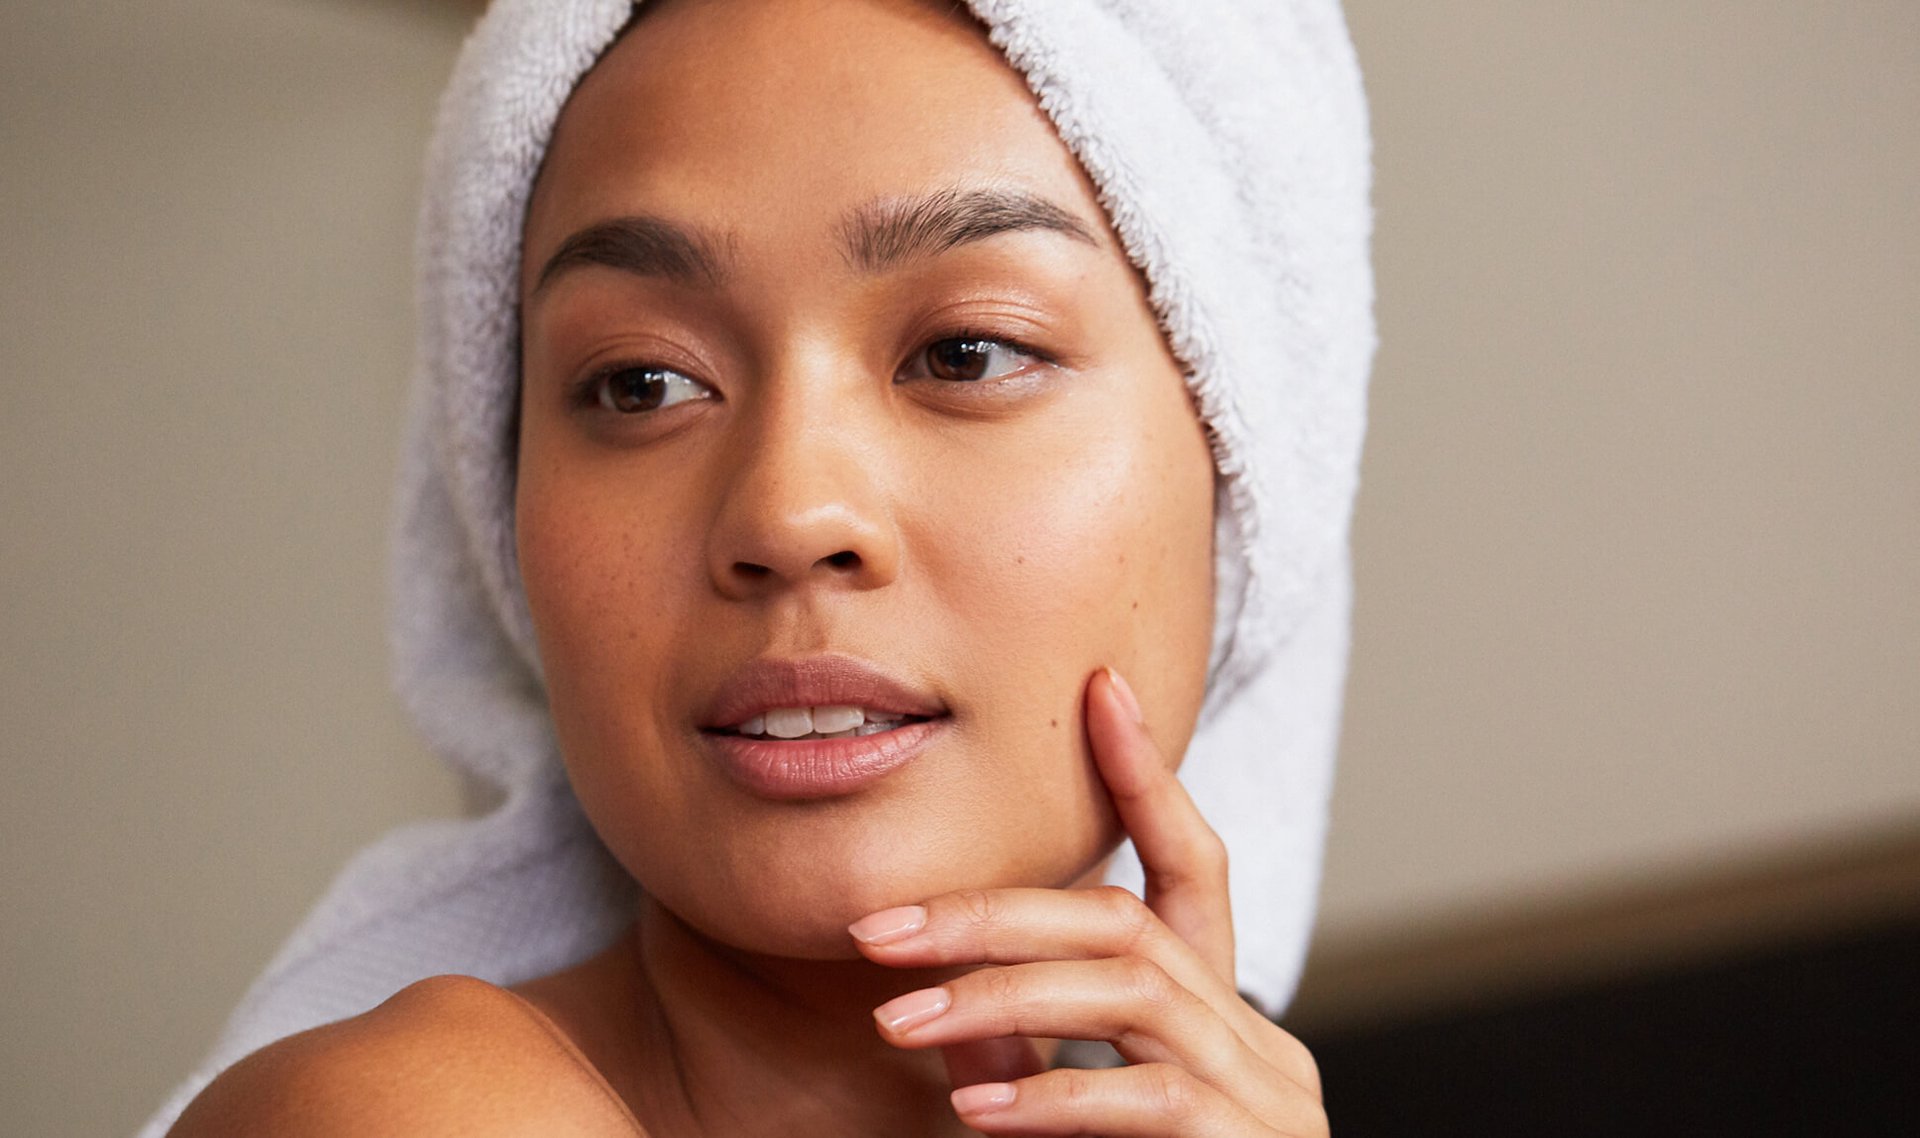 Are Your Lips Peeling? This May Be Why